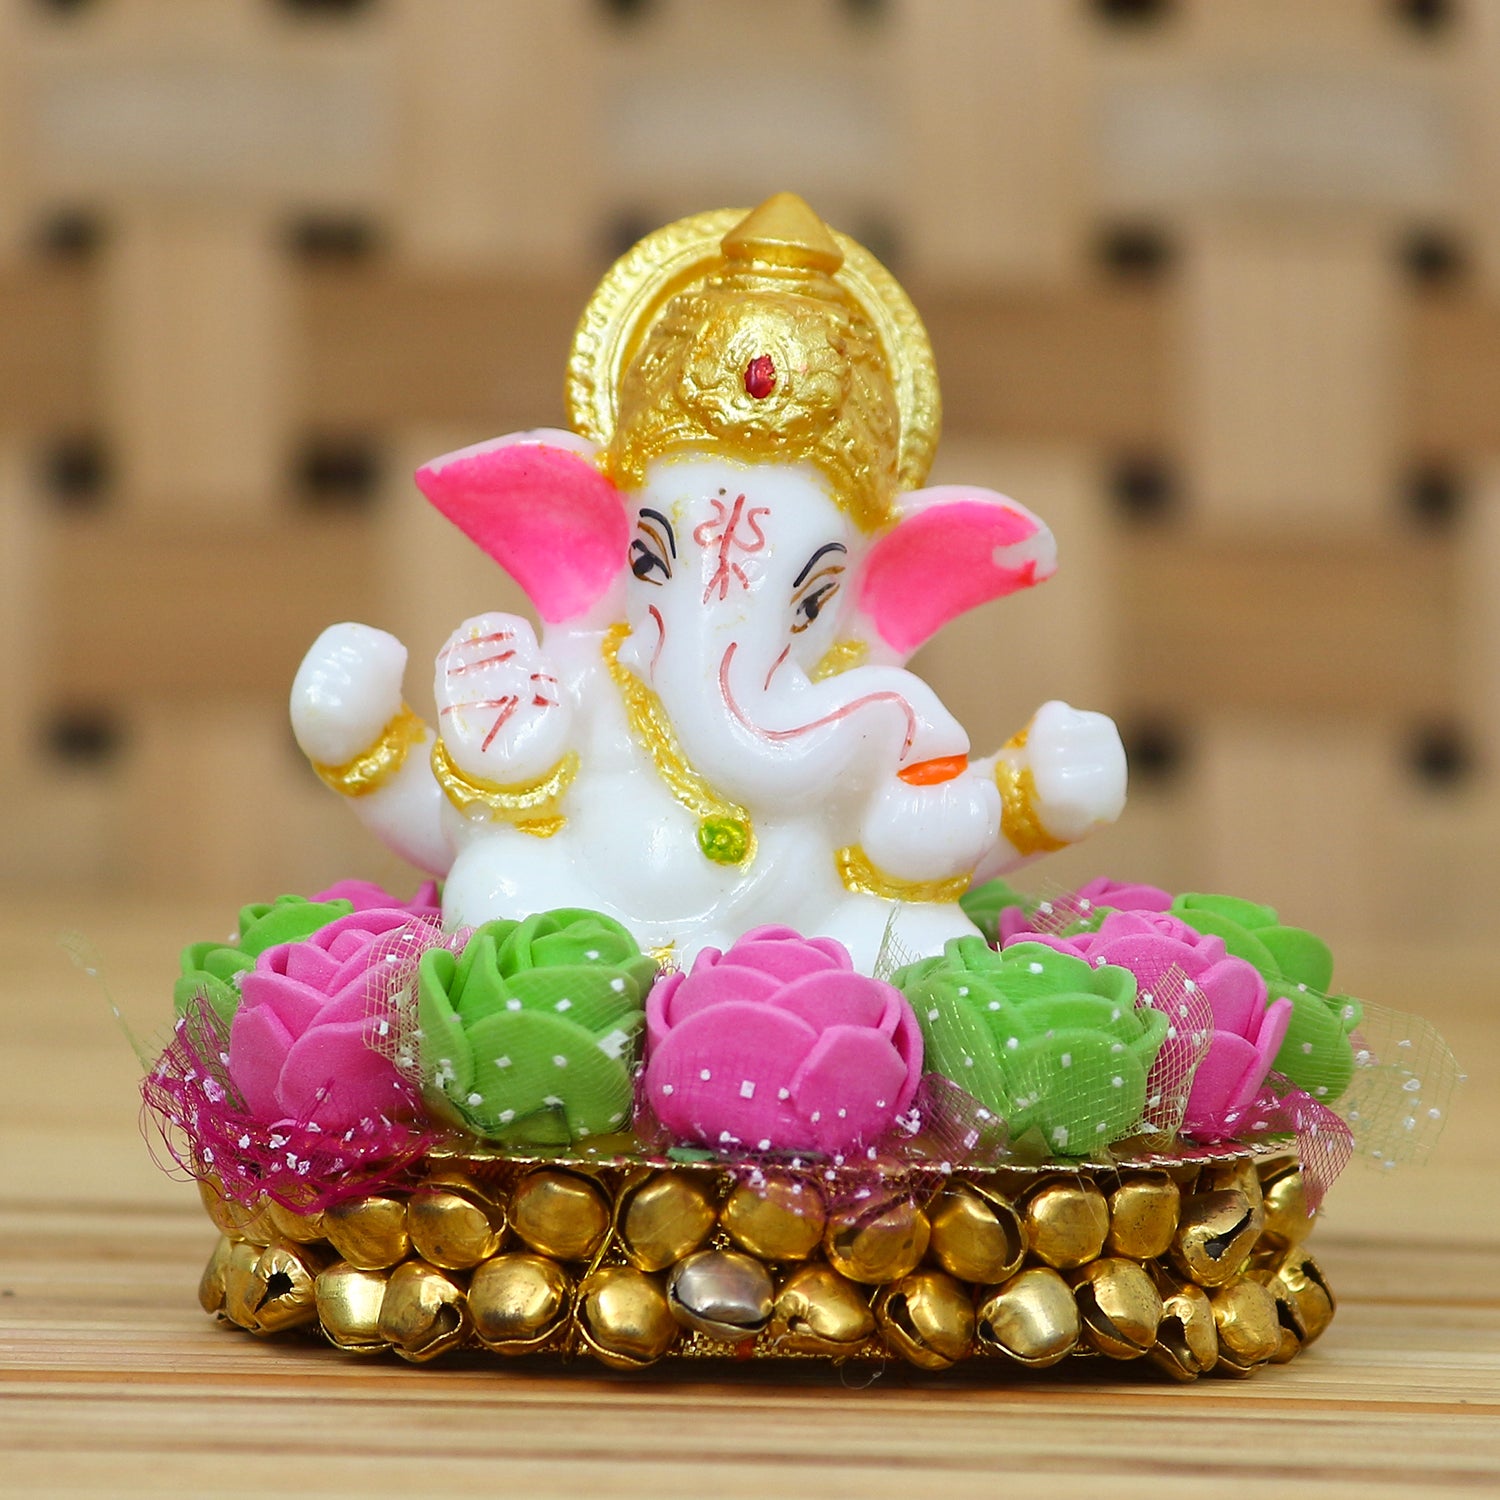 Golden and White Polyresin Lord Ganesha Idol on Decorative Pink and Green Flowers Plate 1